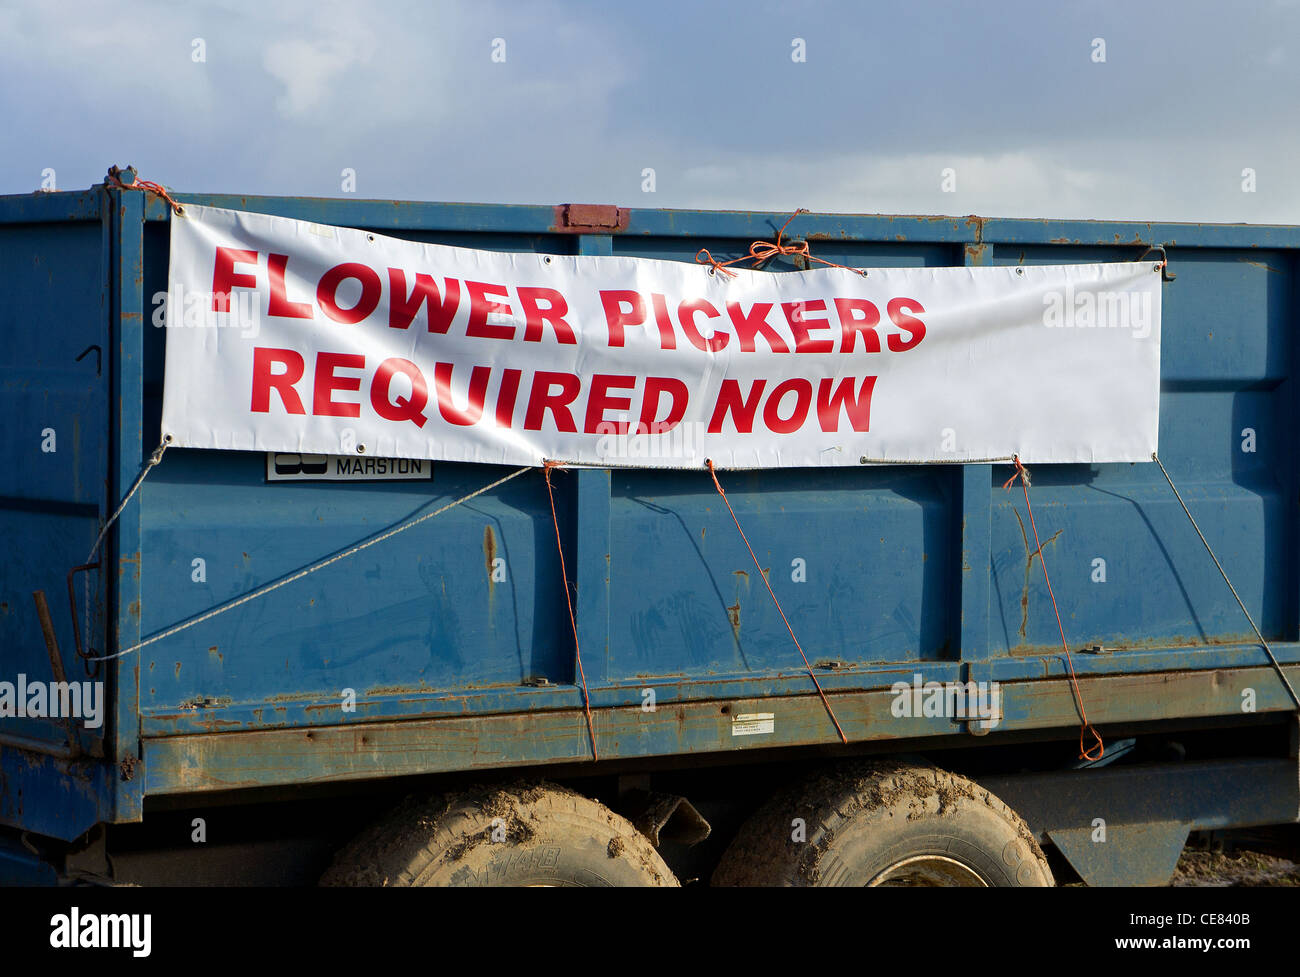 An advert for Flower pickers in Cornwall, UK Stock Photo